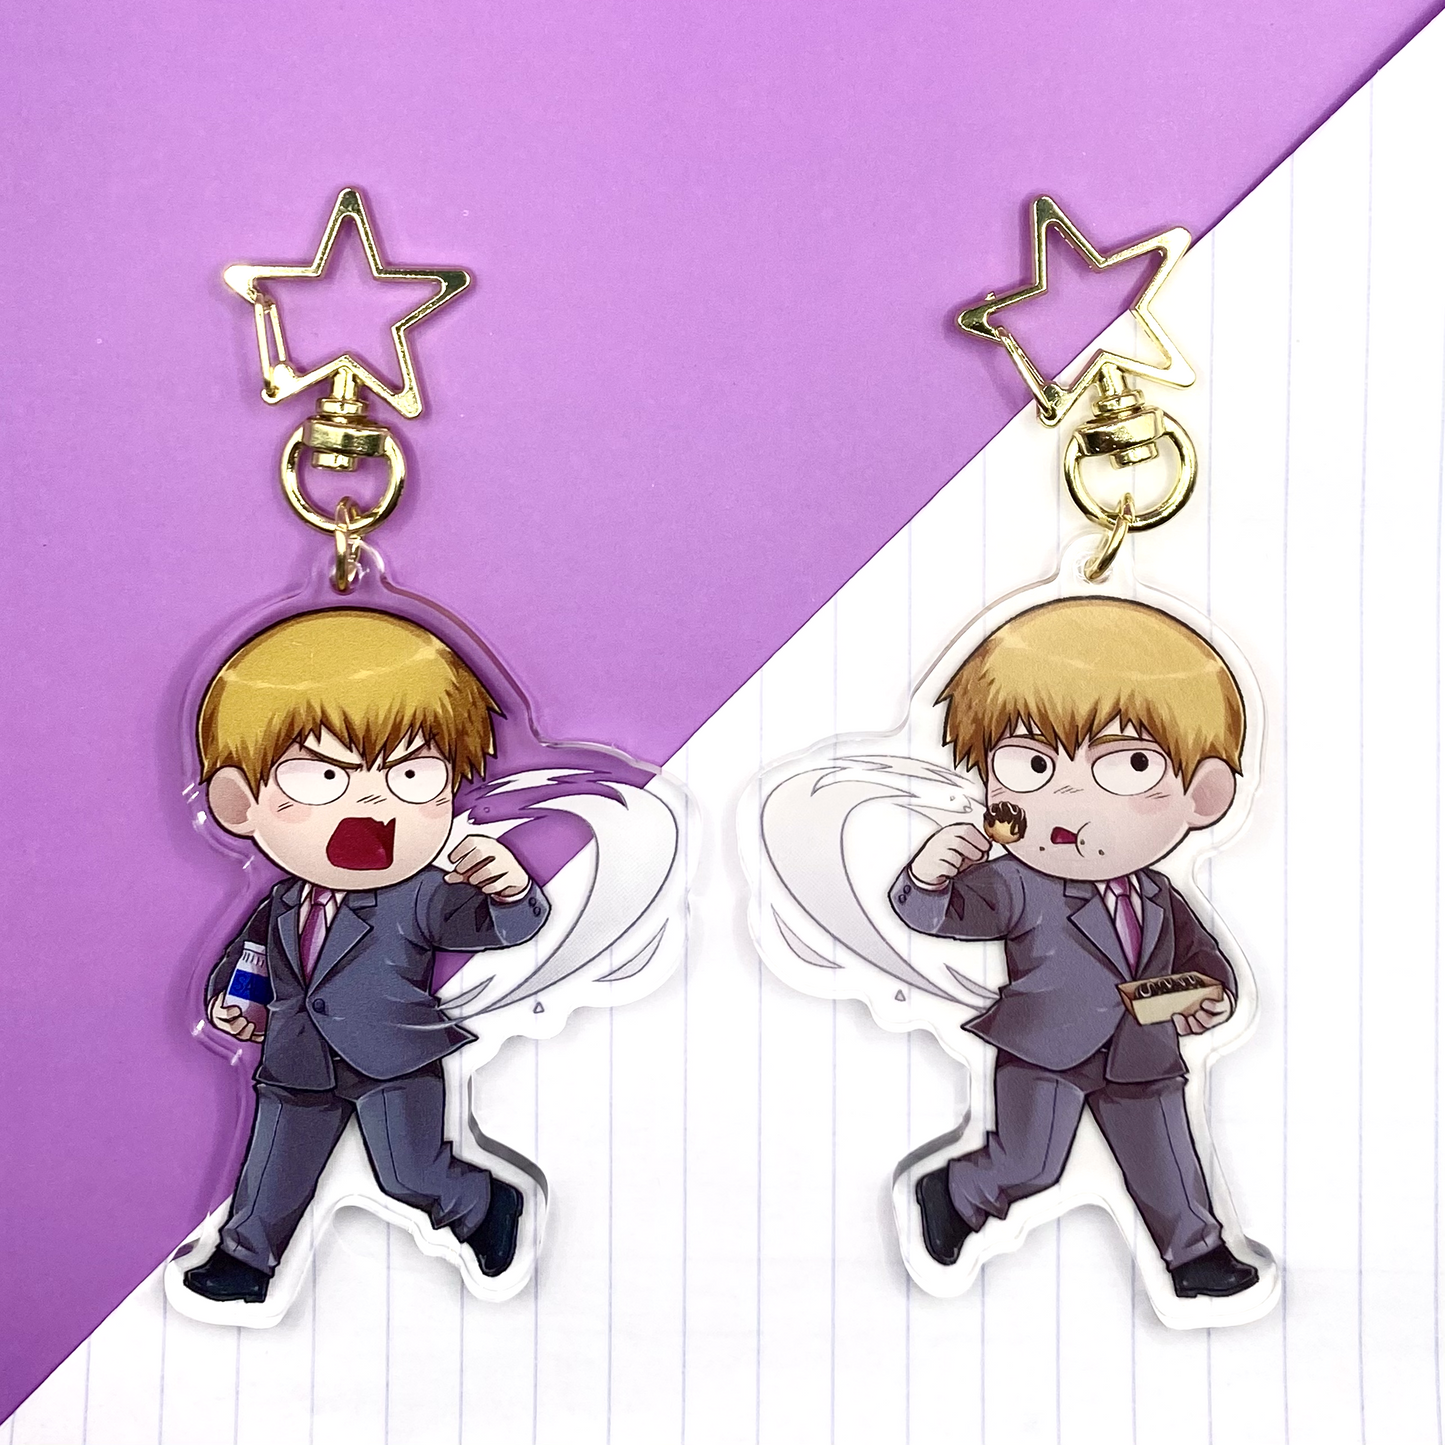 Mob Psycho 100 Reigen and Mob Charms